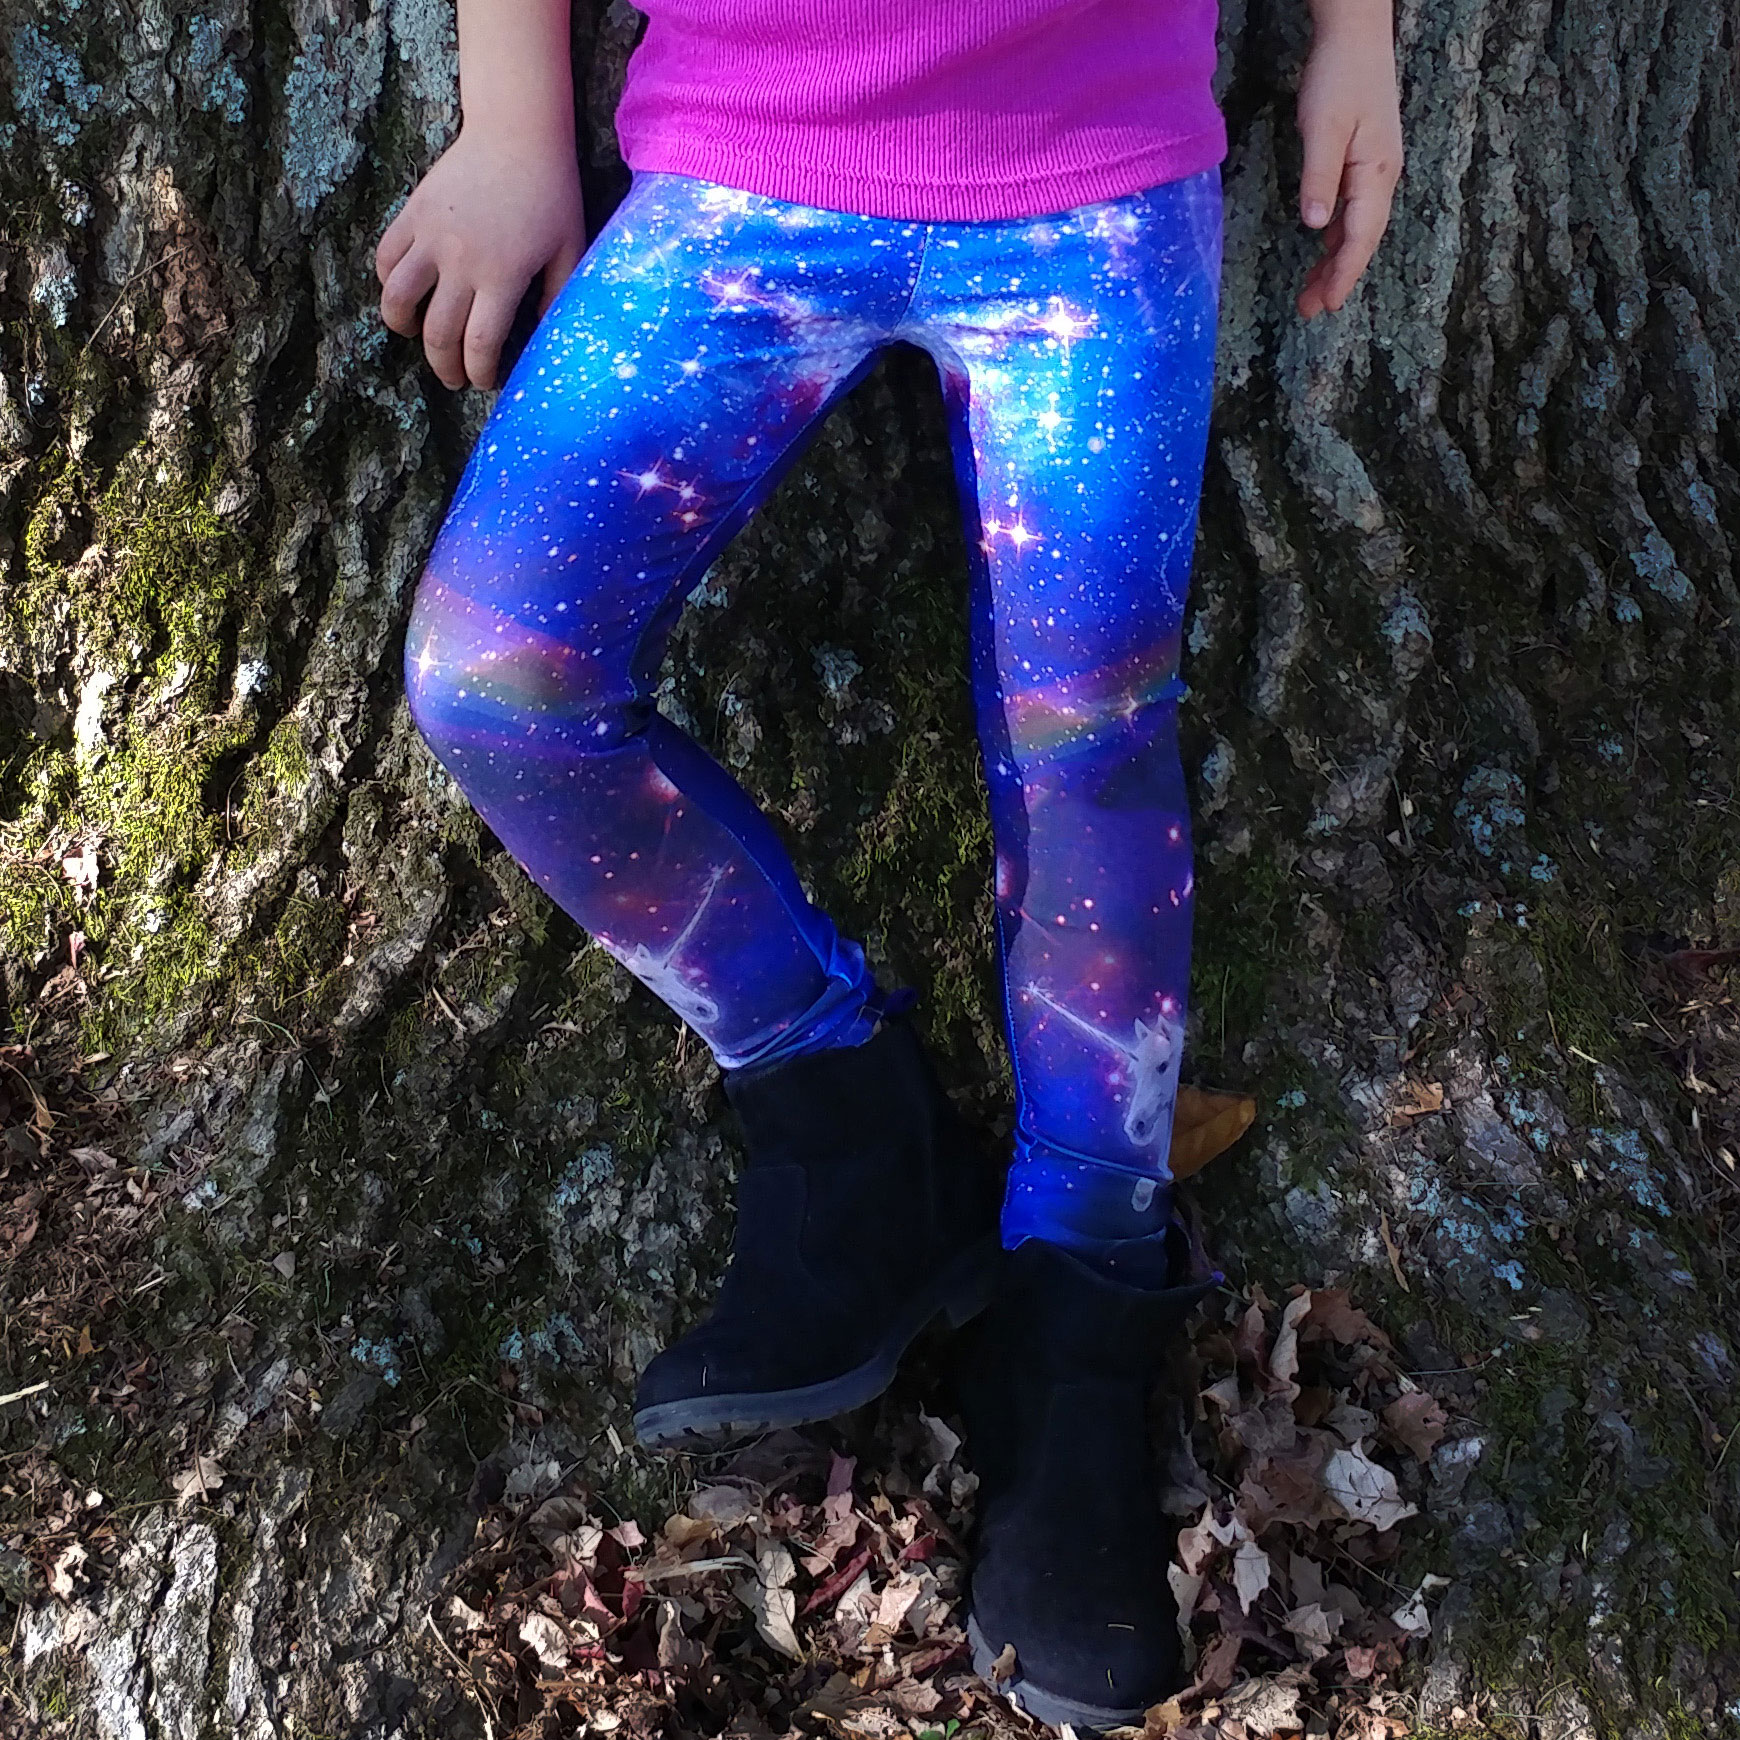  Aflyko Girls' Leggings Magic Purple Planet UFO Shooting Star  Kids Workout Pants Dance Tights 4-10T: Clothing, Shoes & Jewelry